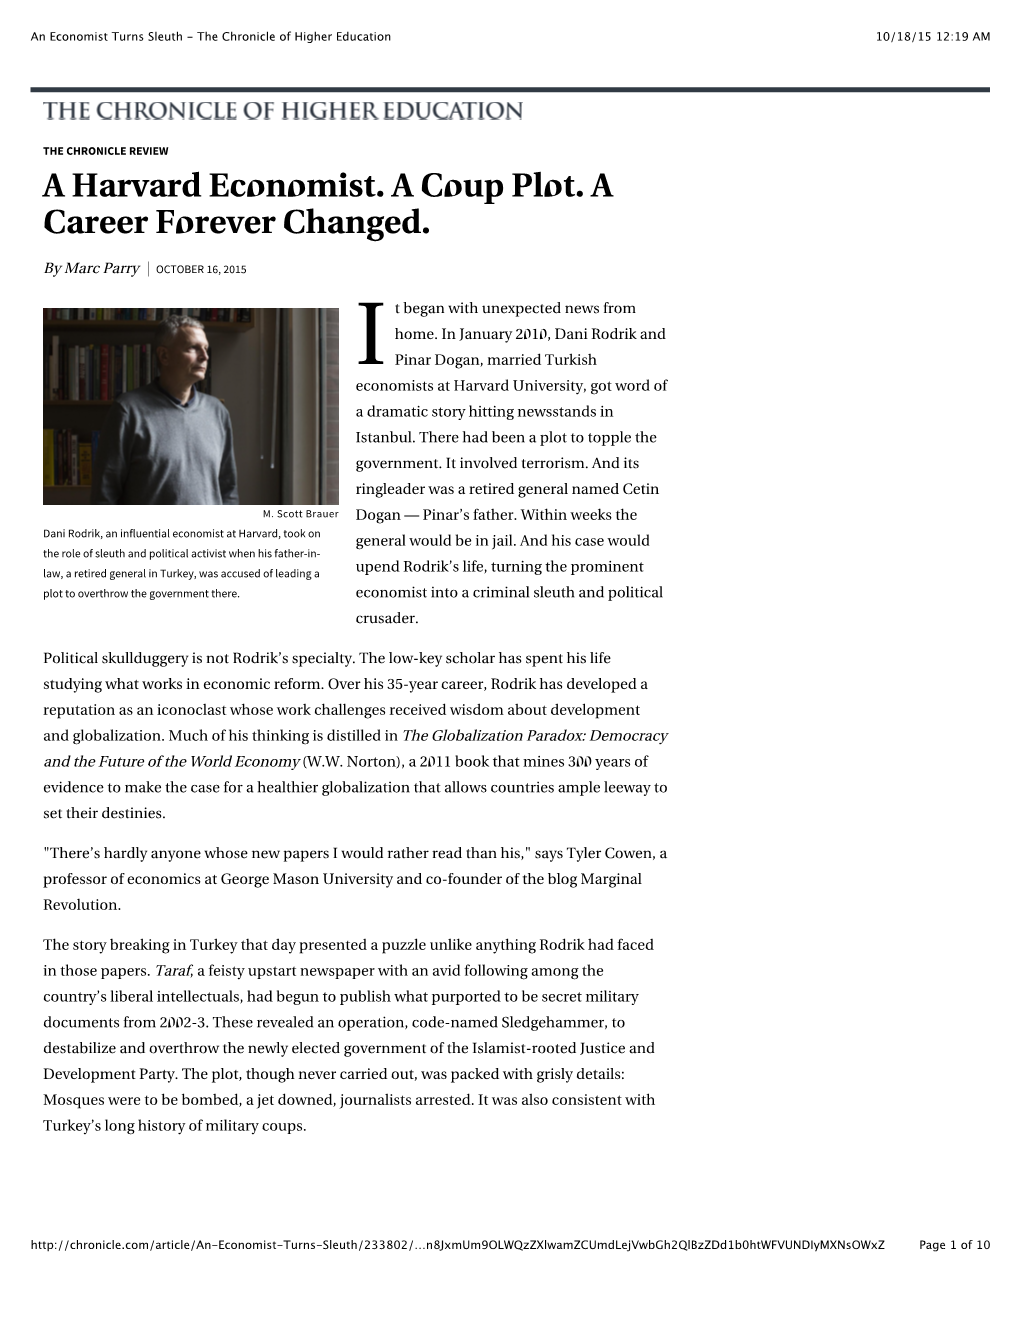 An Economist Turns Sleuth - the Chronicle of Higher Education 10/18/15 12:19 AM